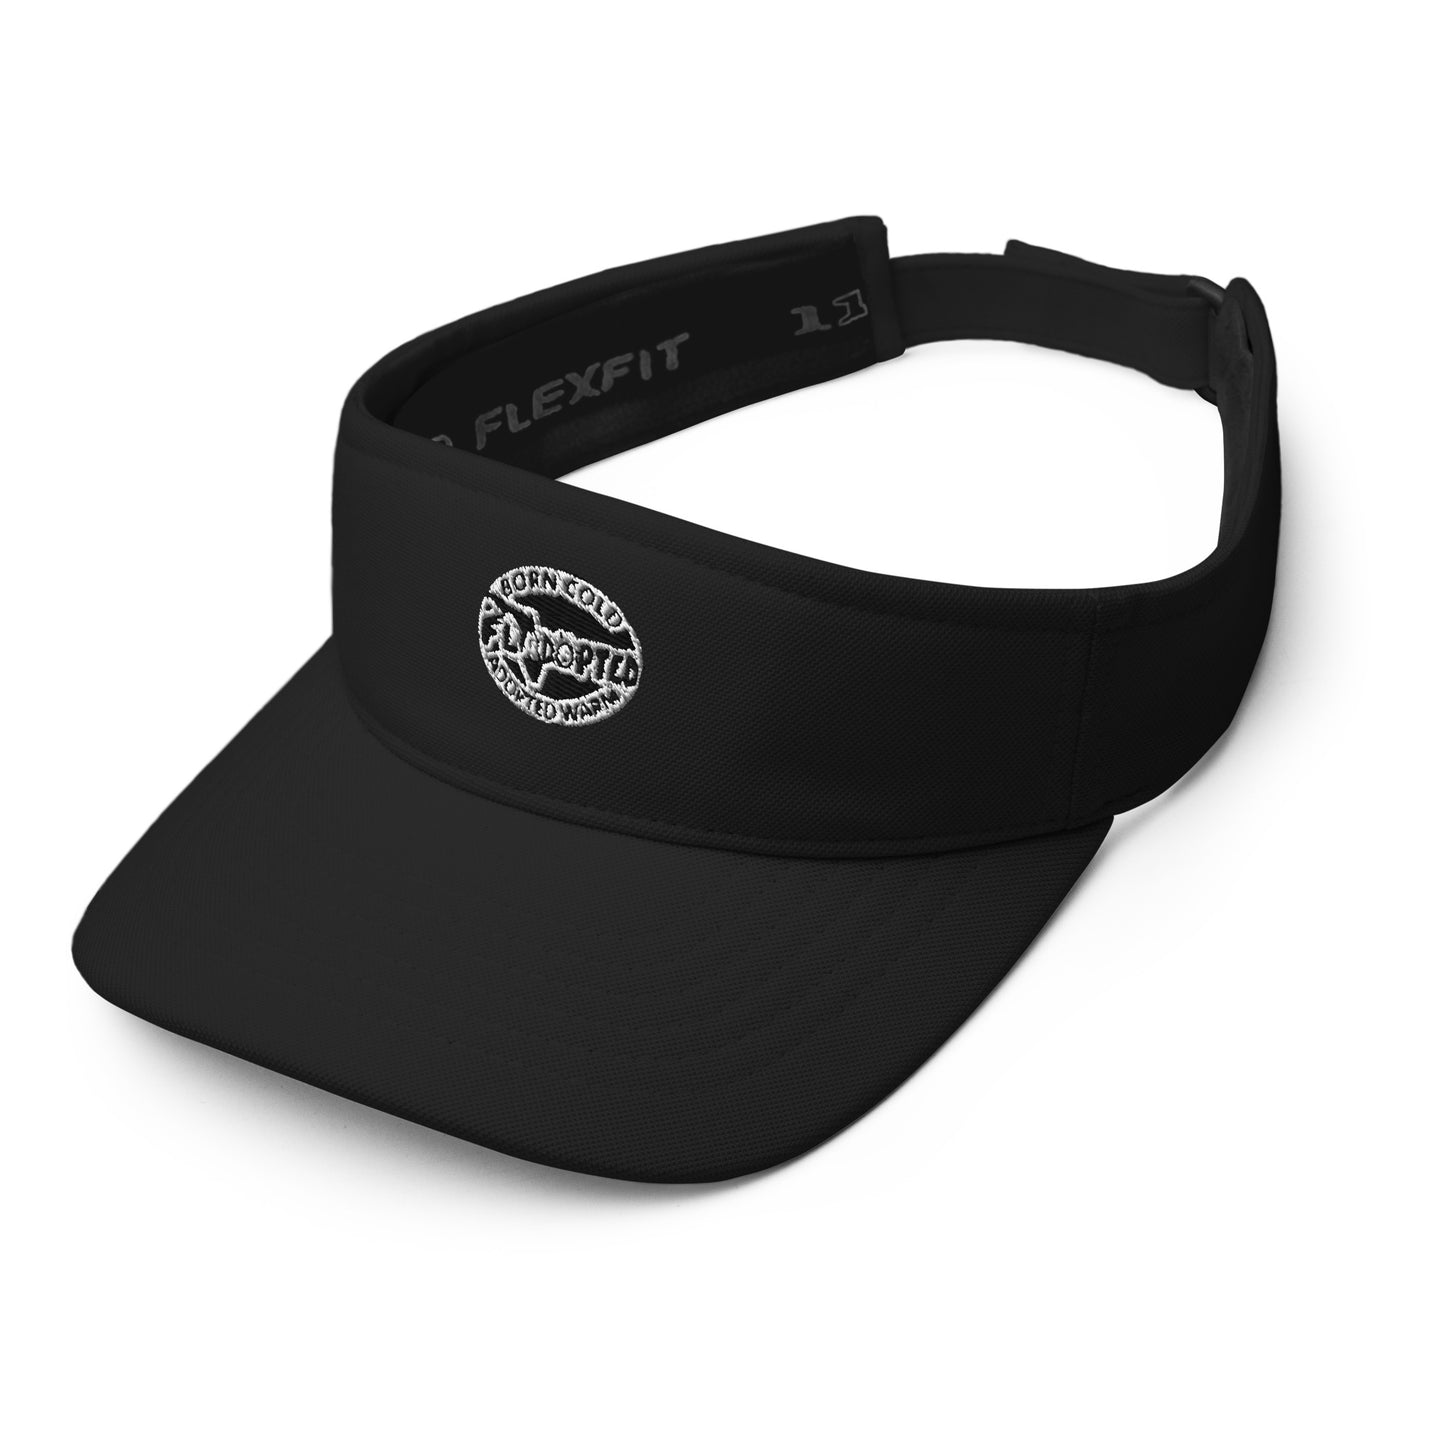 FLadopted BCAW Visor